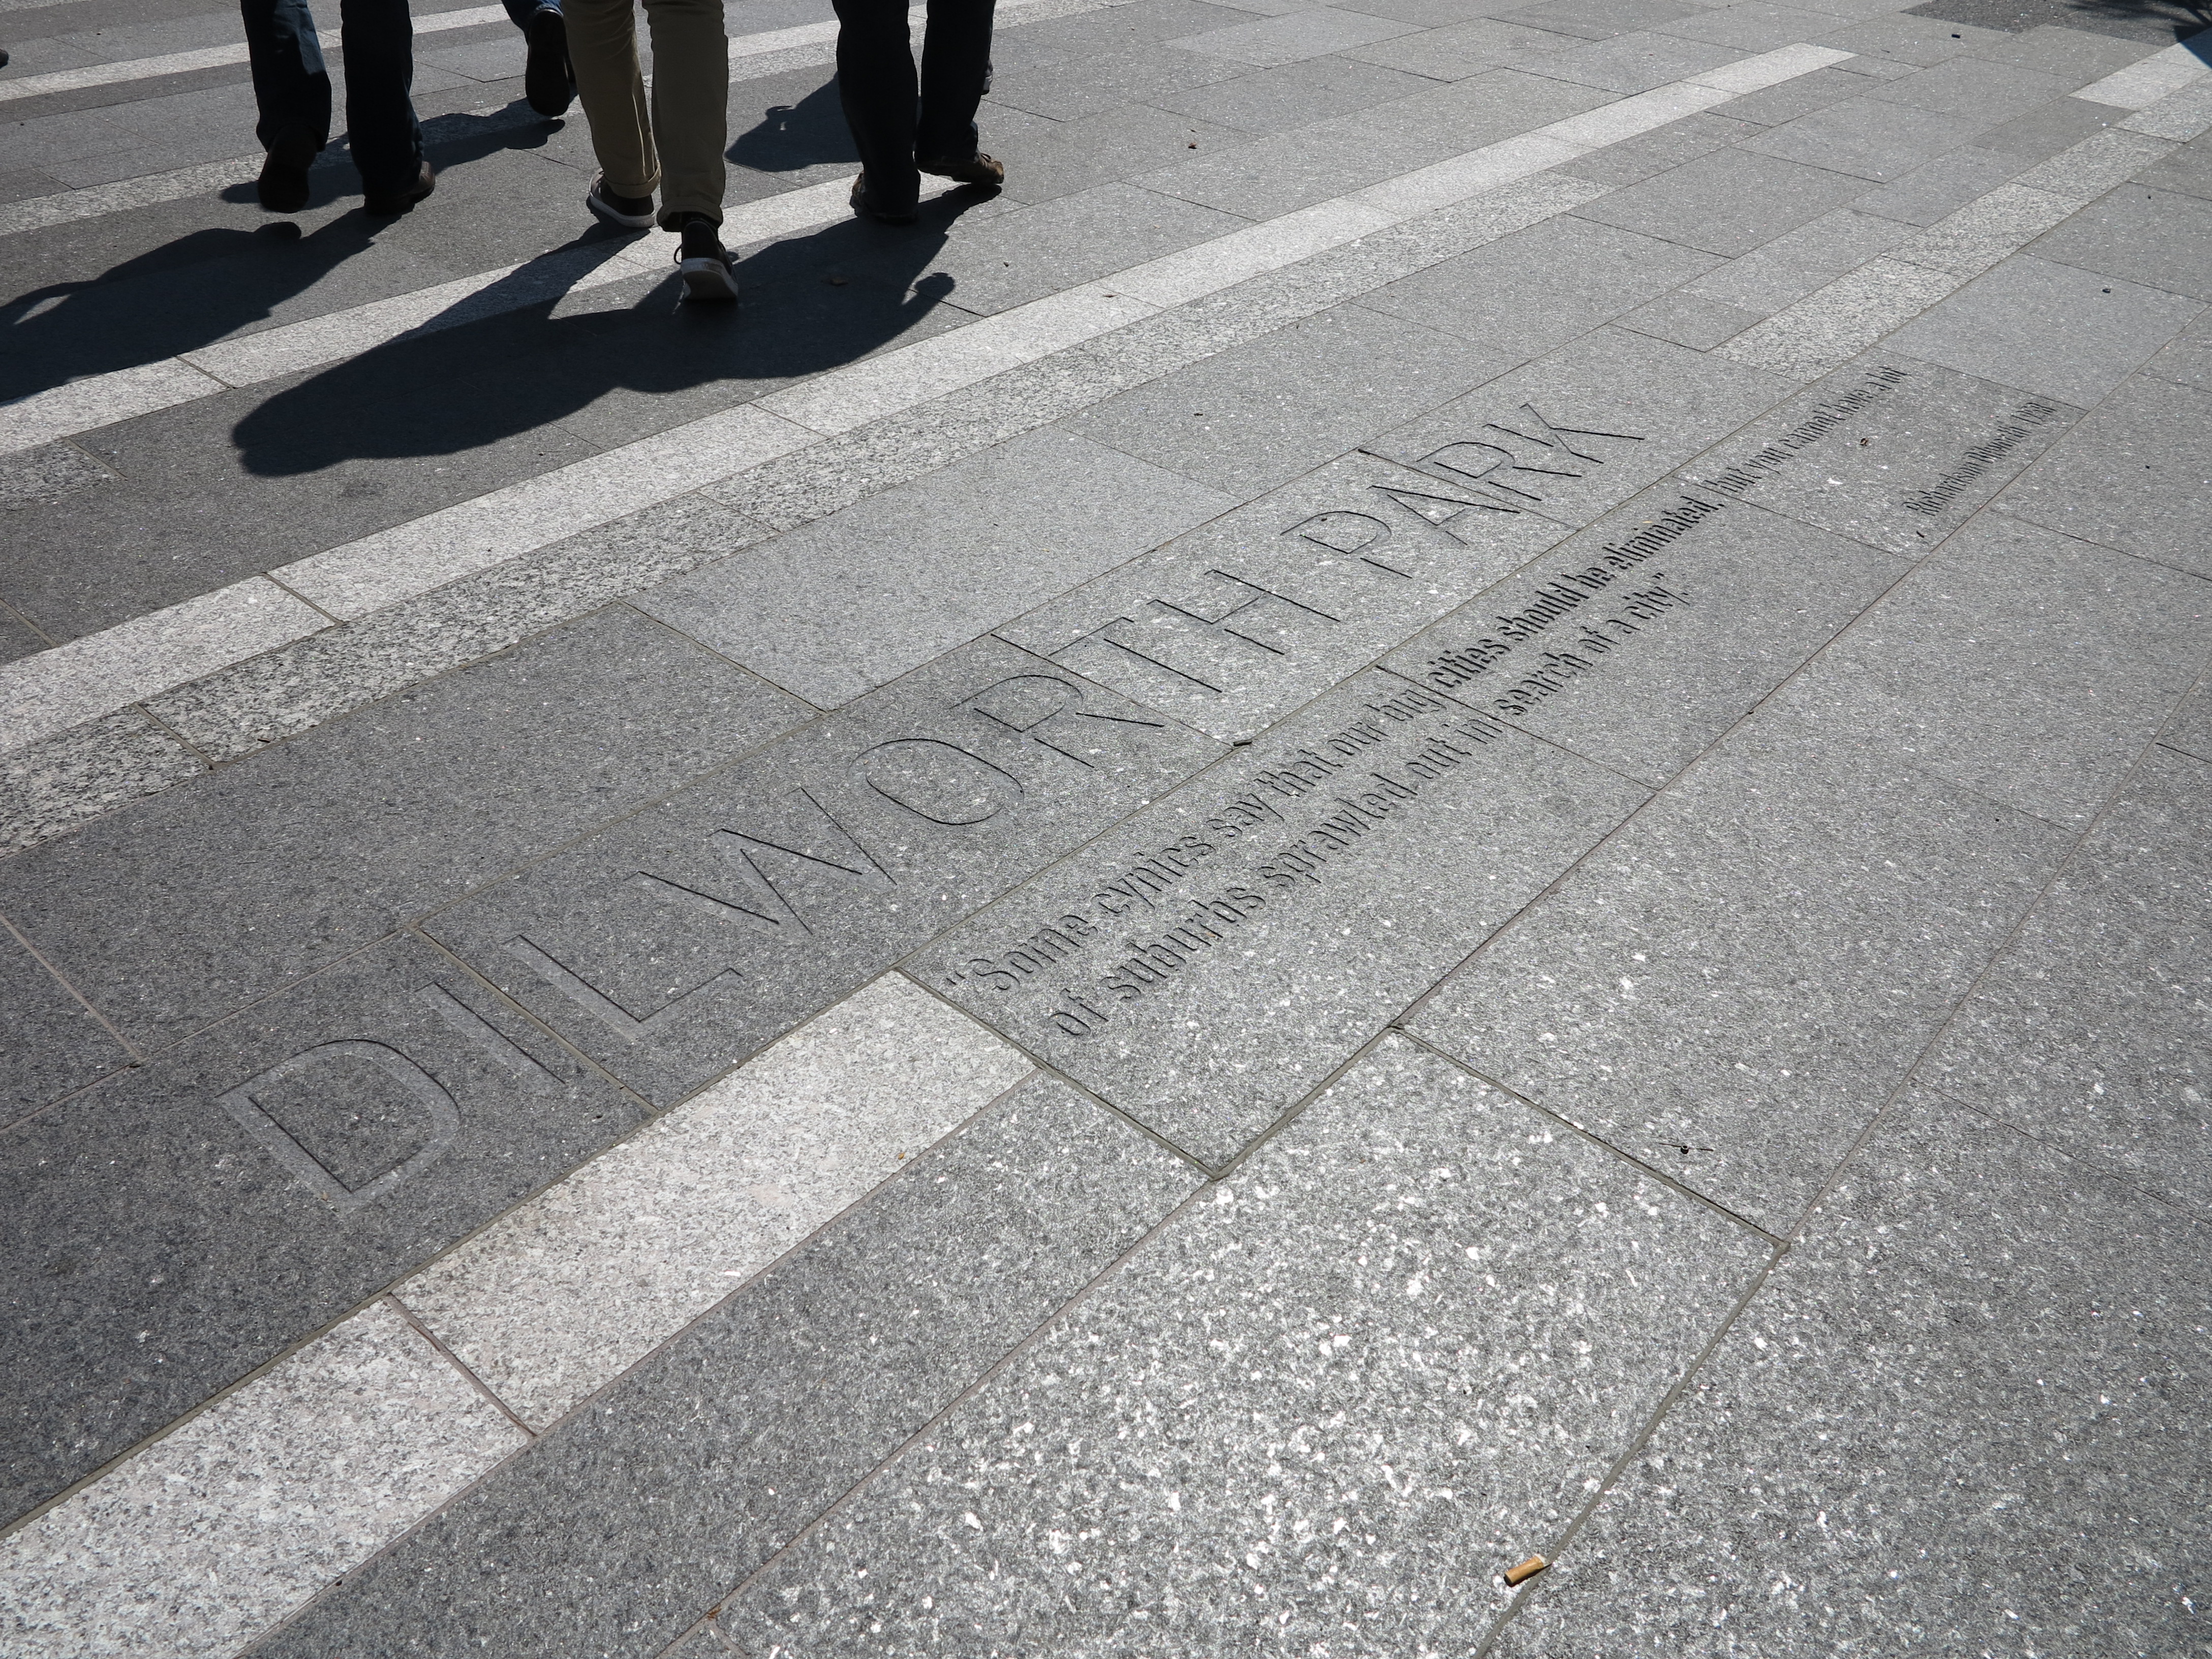 Dilworth Park, etched in stone